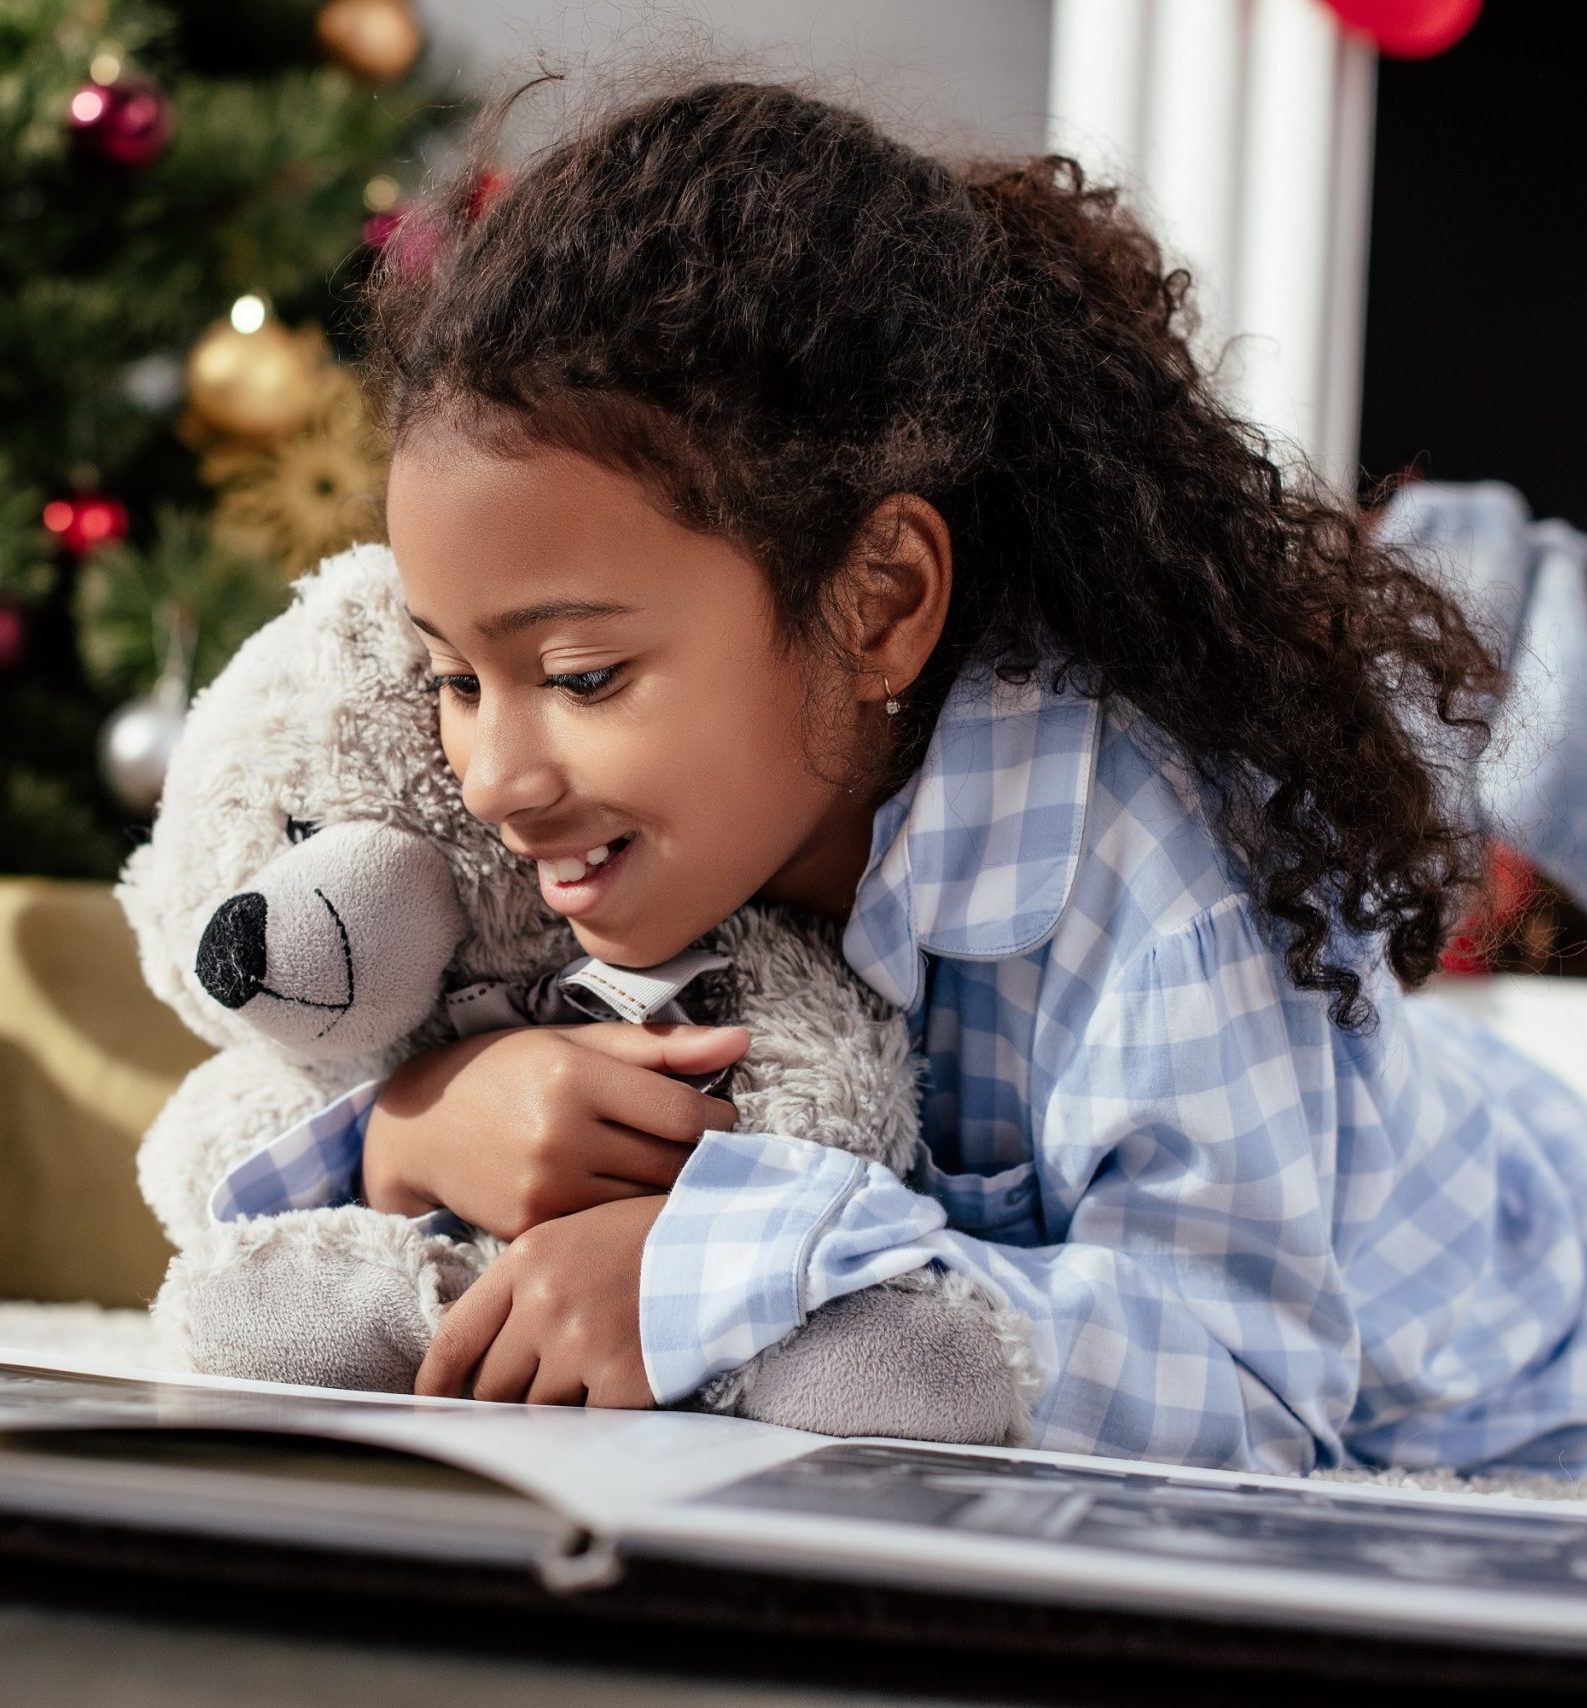 surprised and happy girl reading a book holding a teddy bear in front of christmas tree